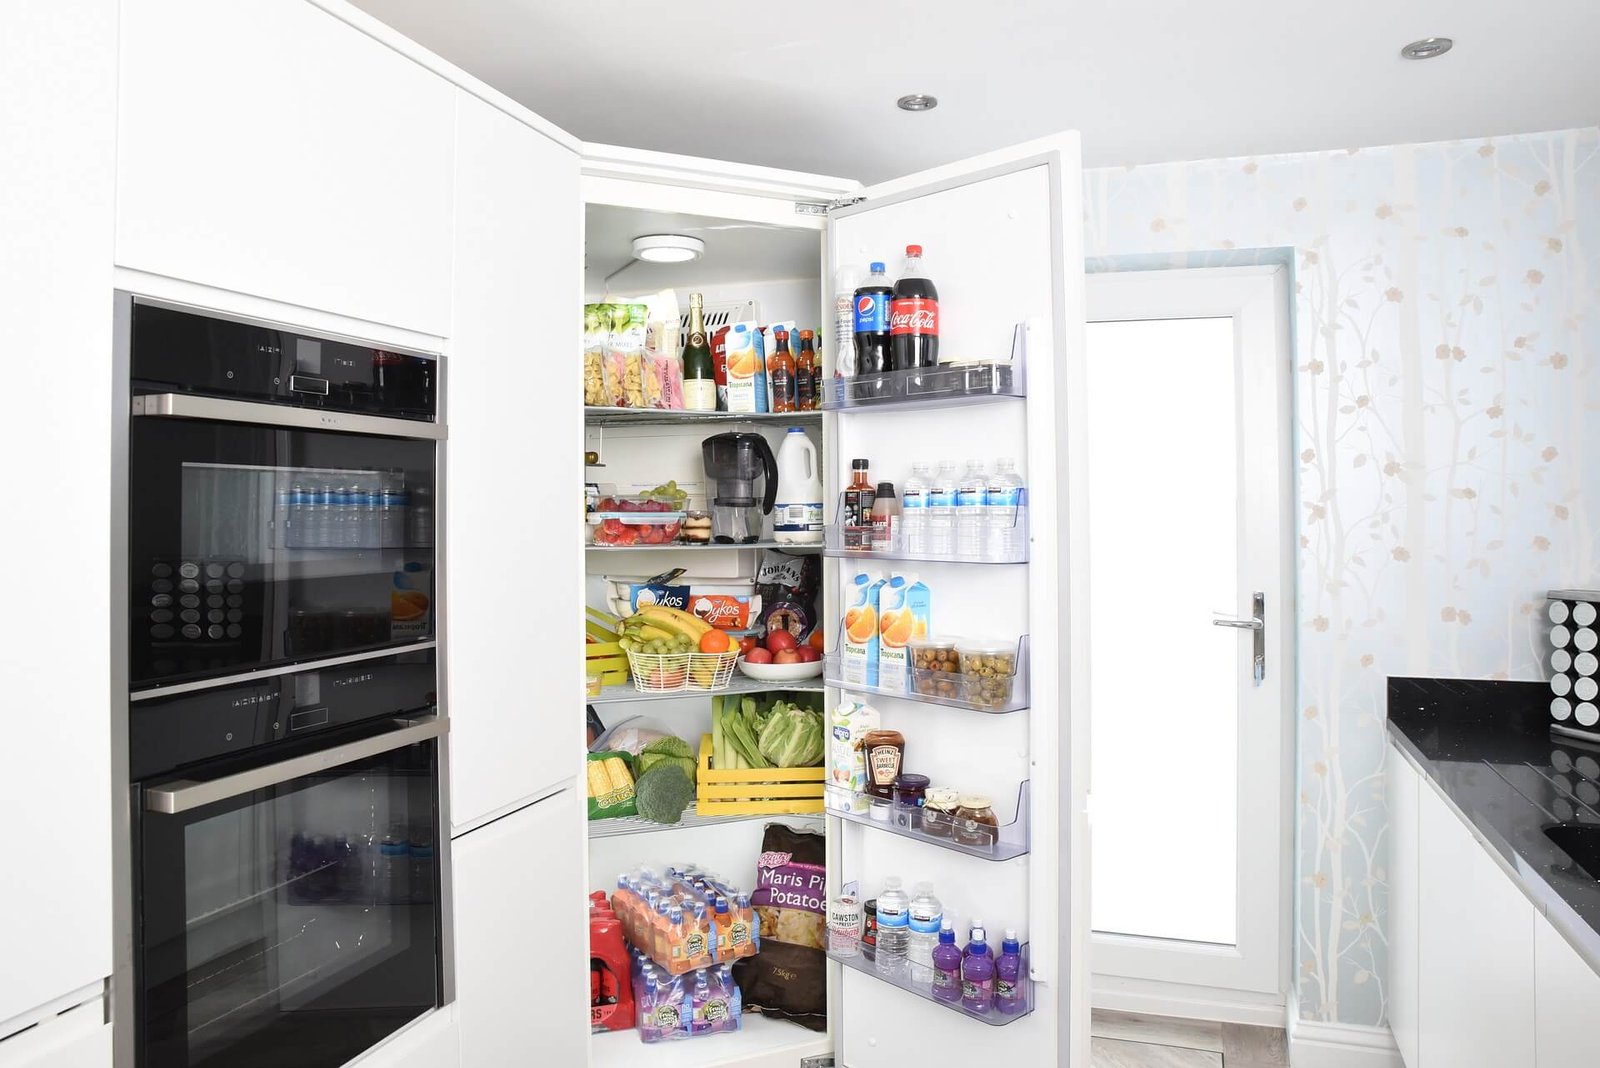 how-to-reduce-electricity-consumption-of-refrigerator-8-tips-that